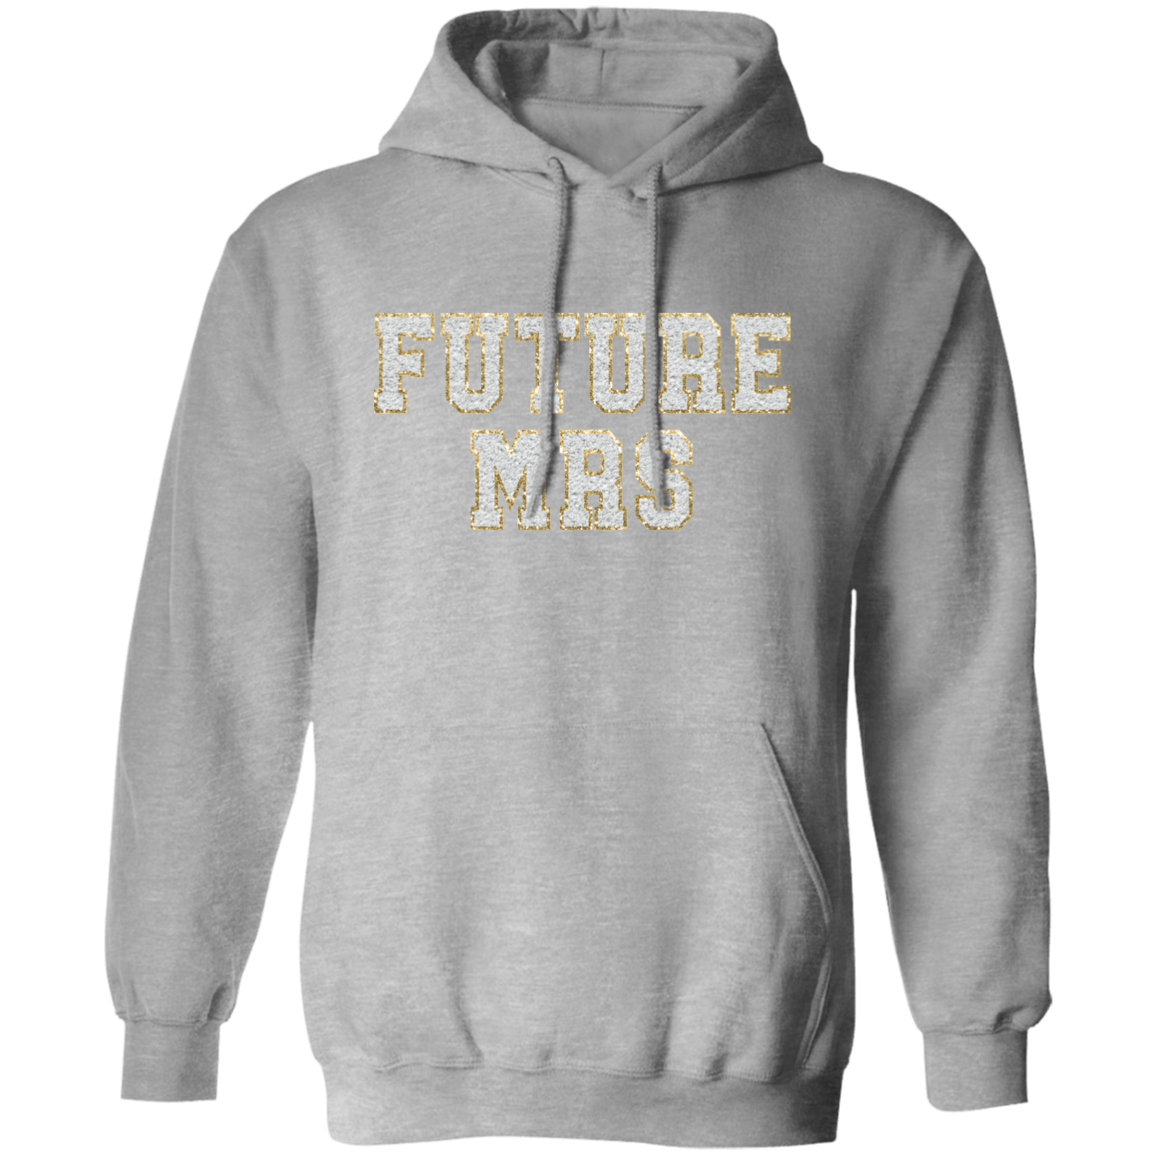 Future Mrs Pullover Hoodie